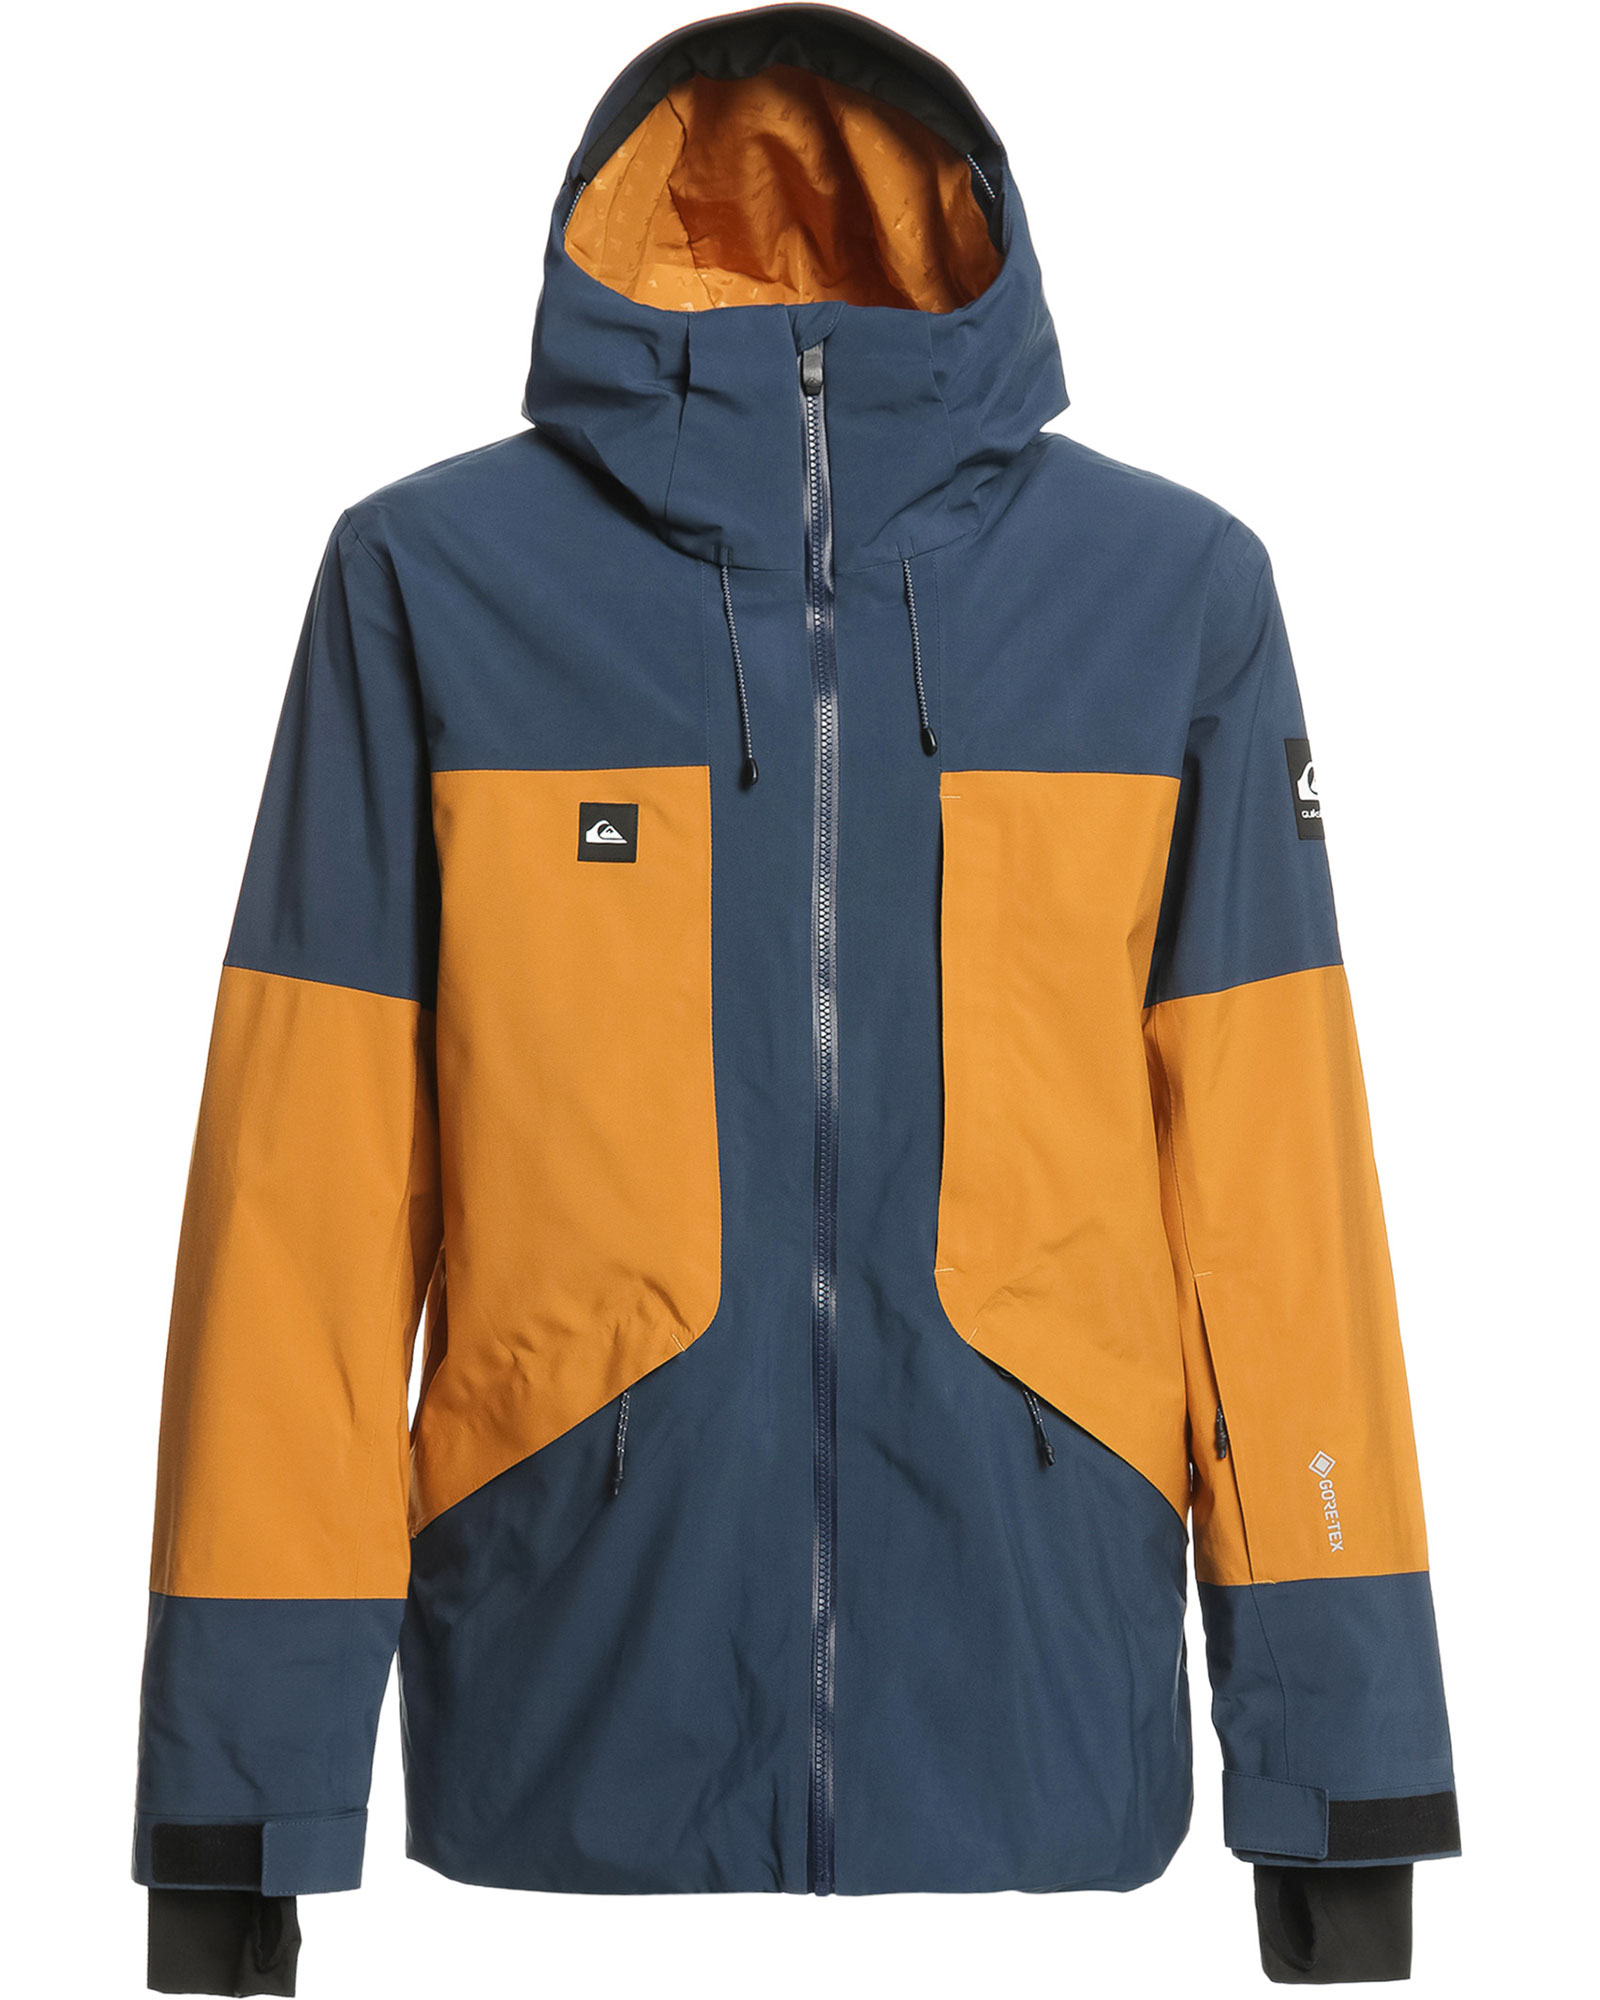 Quiksilver Forever Stretch GORE TEX Insulated Men’s Jacket - Insignia Blue M